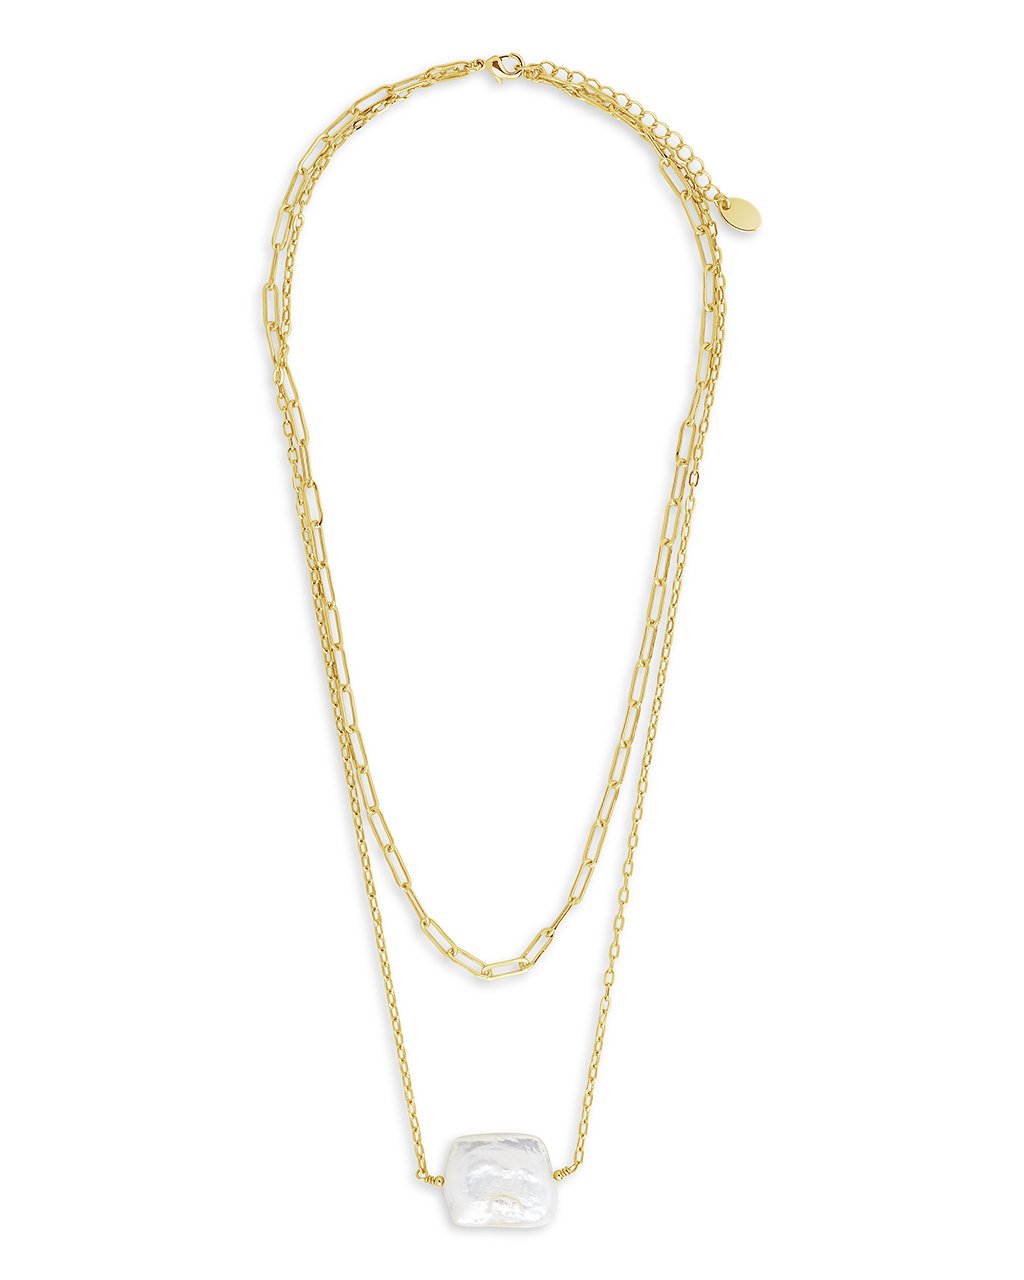 Chain Link and Pearl Layered Necklace by Sterling Forever